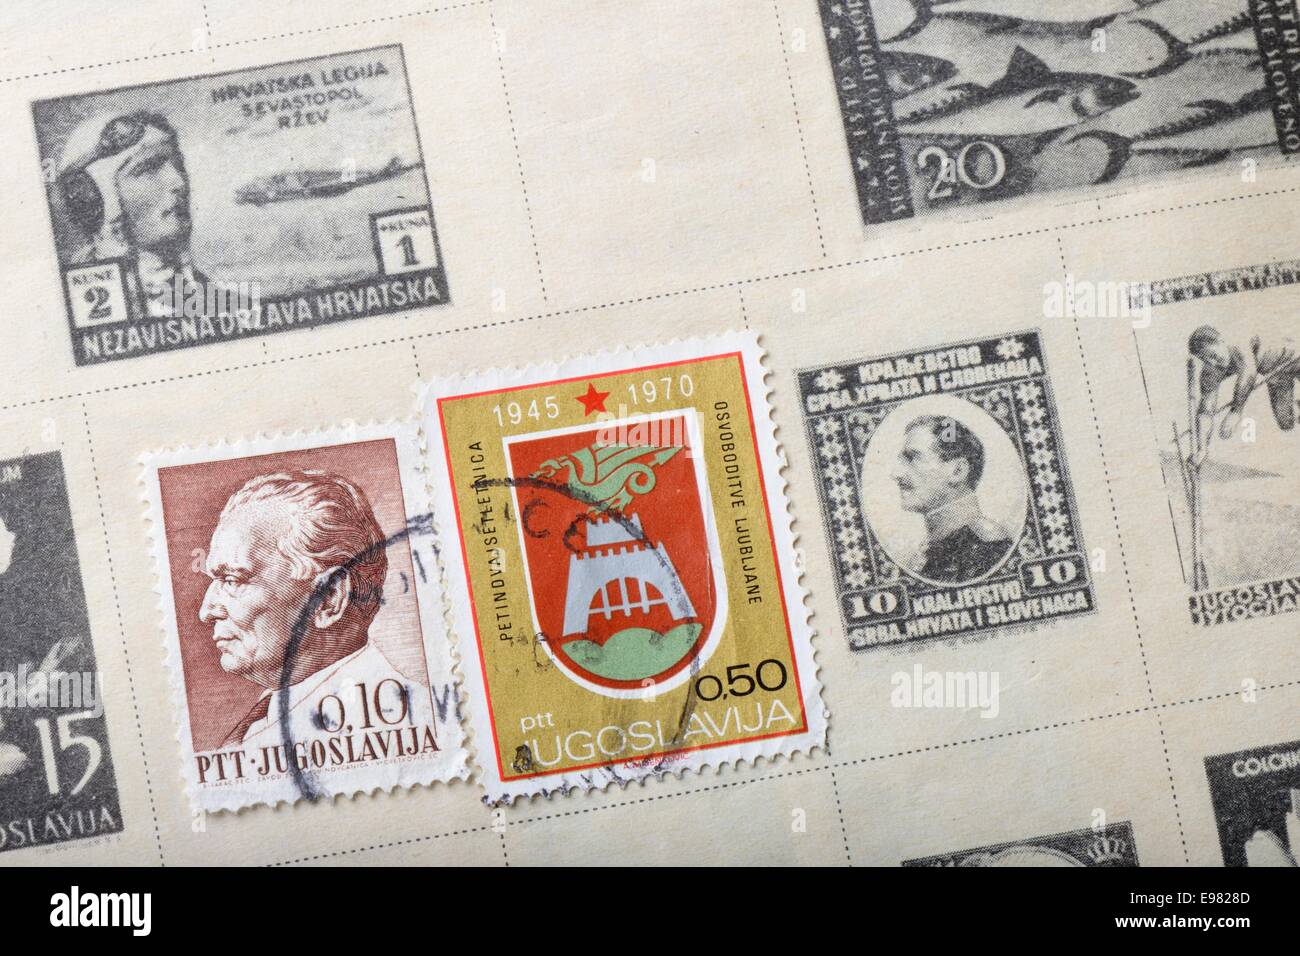 Stamps from the Yugoslavia on album page Stock Photo